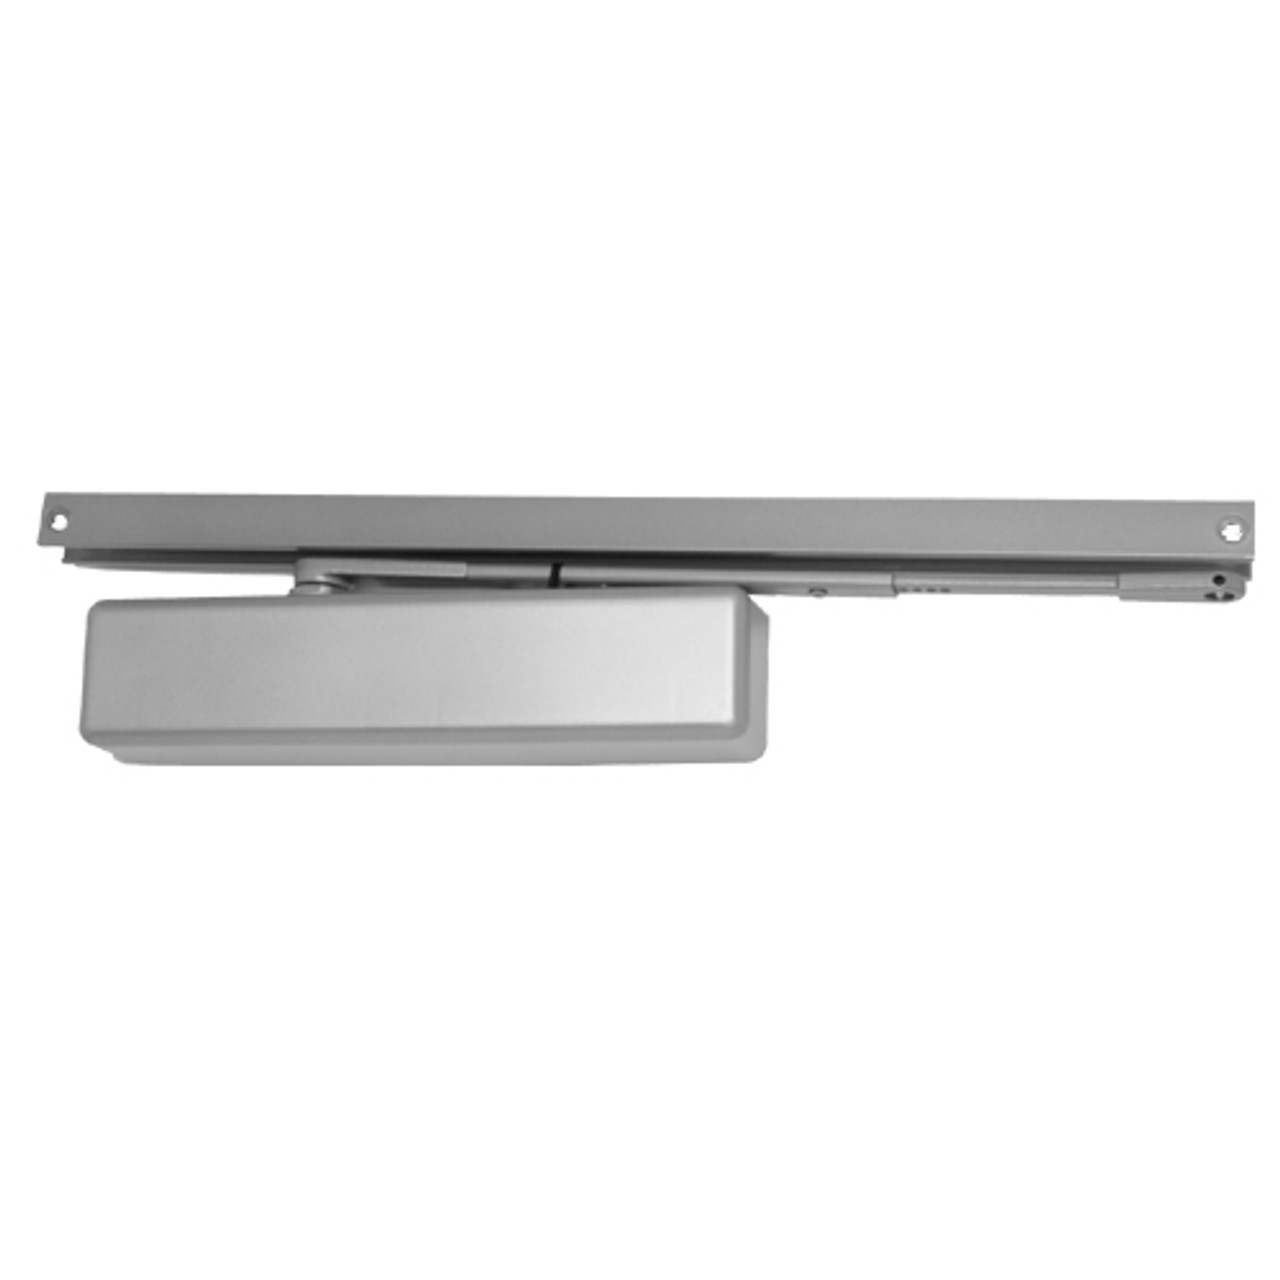 1461T-H-AL LCN Surface Mount Door Closer with Hold Open Arm in Aluminum Finish